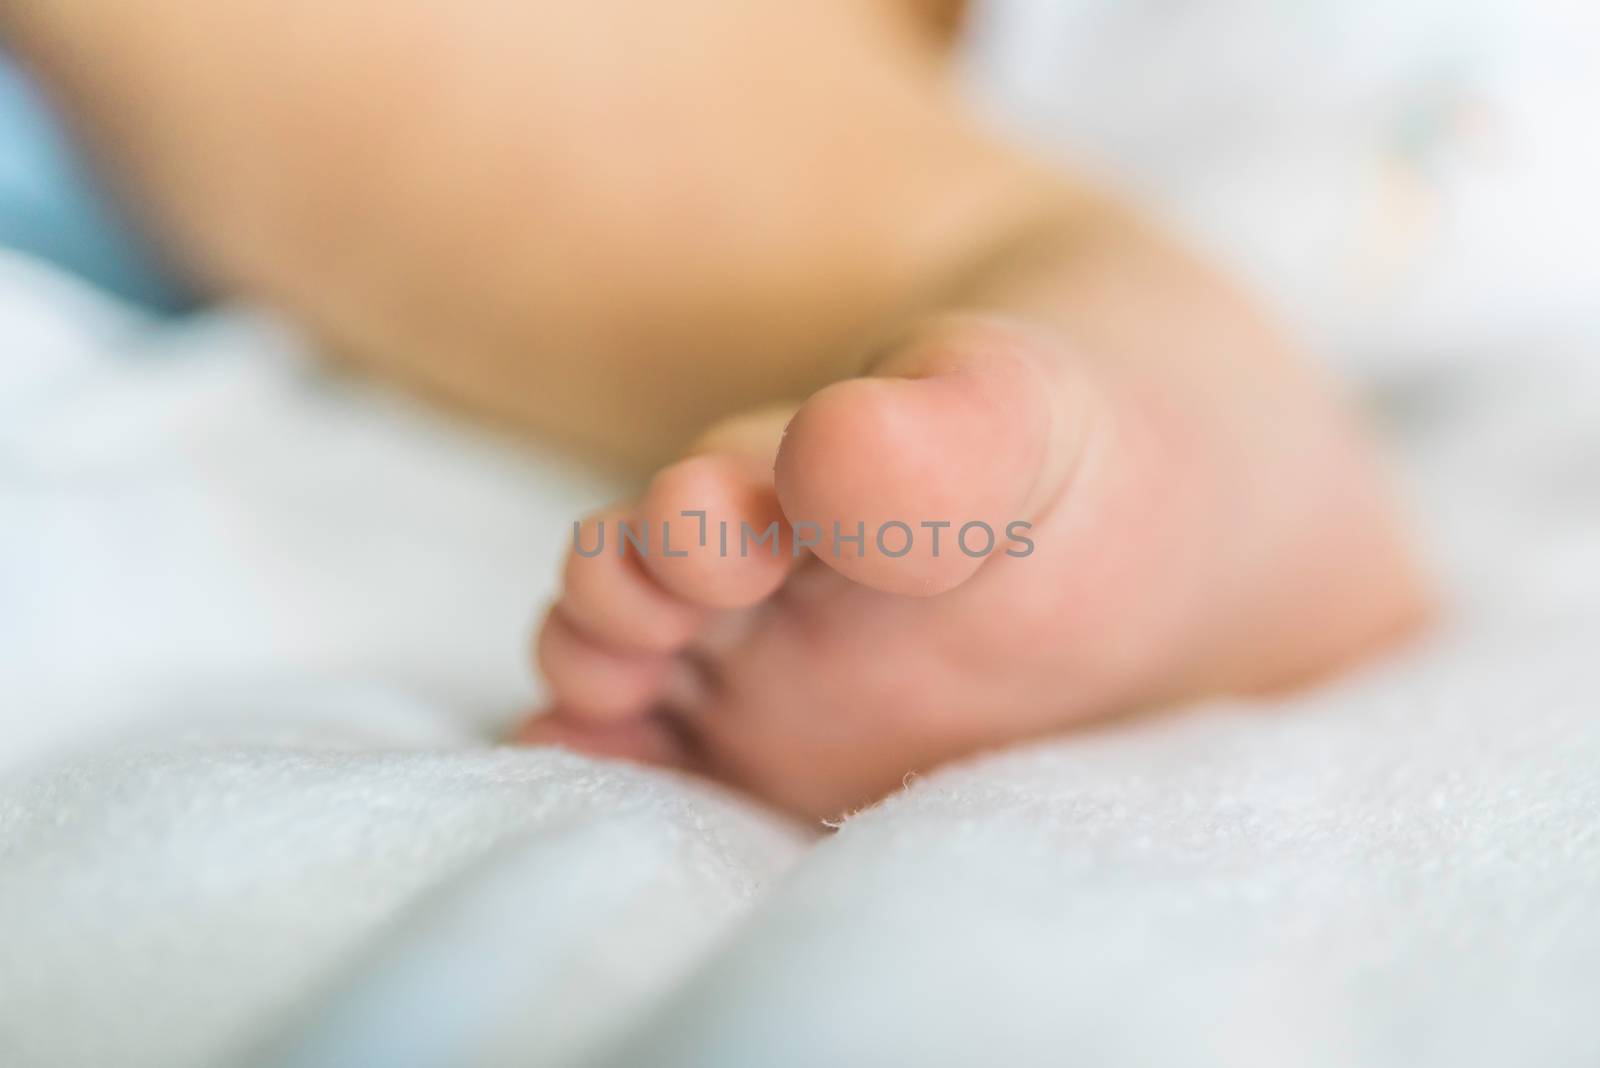 Baby's feet are on the couch. by photobyphotoboy